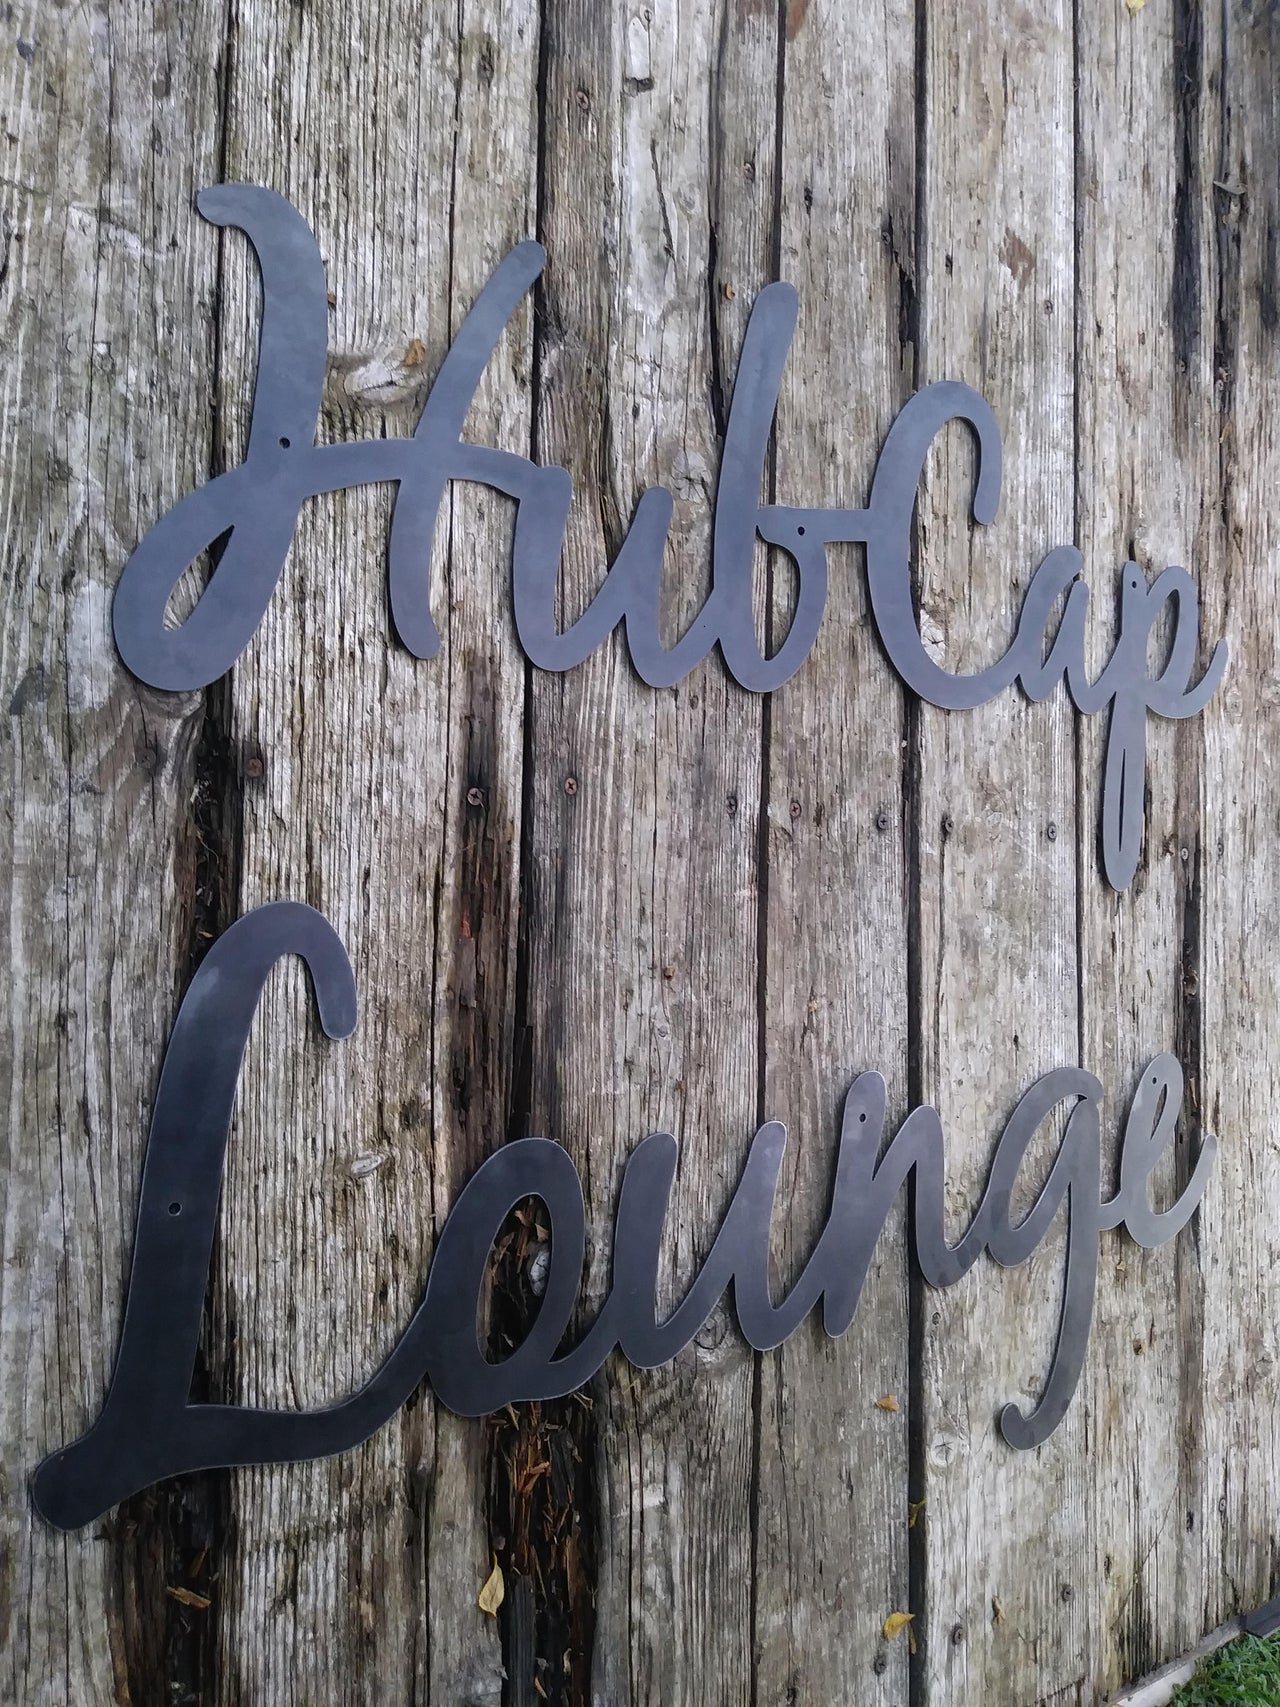 This is a custom metal cursive sign that is powder coated black and reads' "Hubcap Lounge".